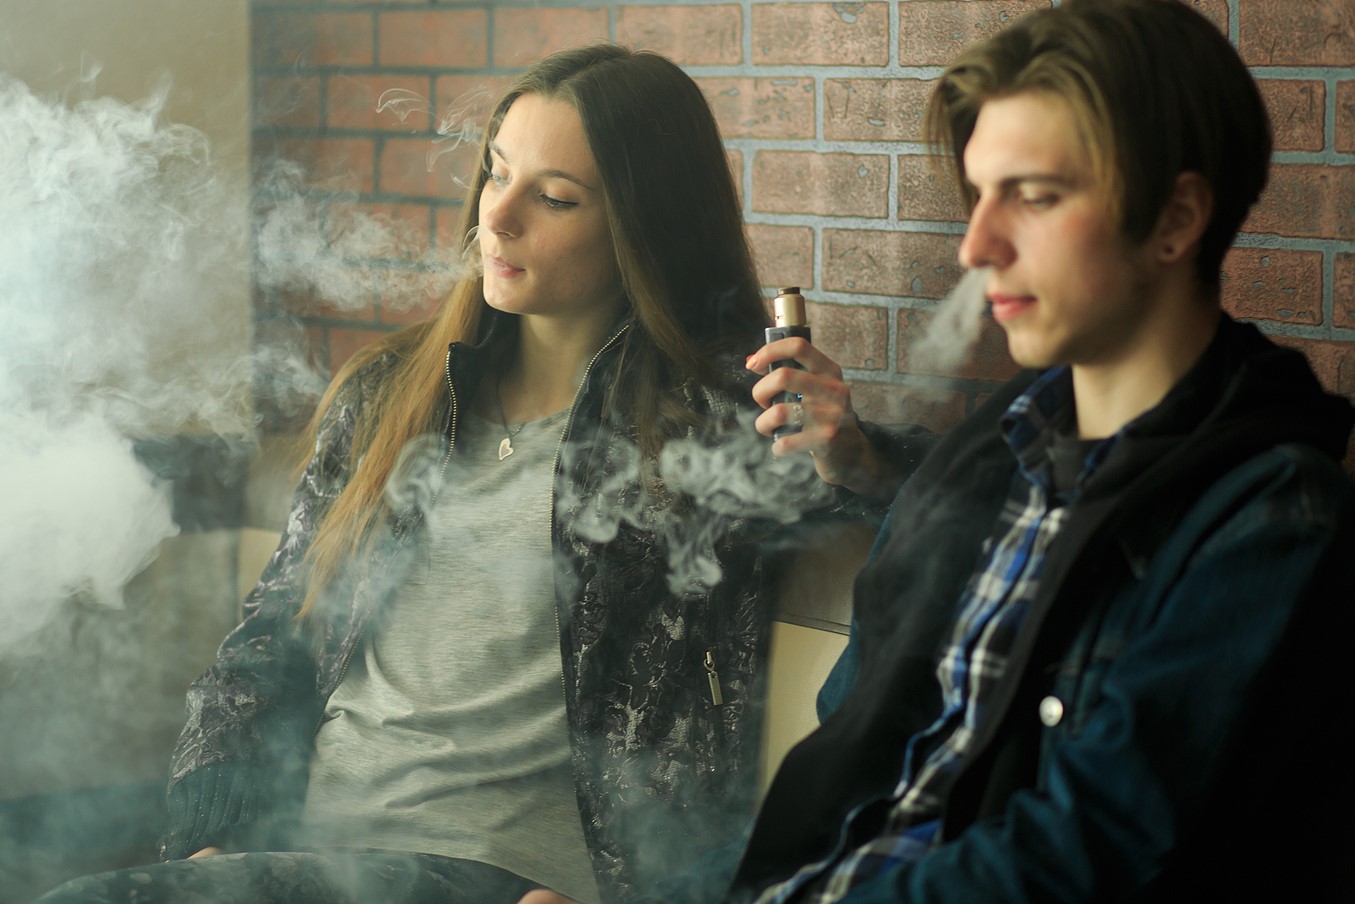 Common Substances Abuse in College Students